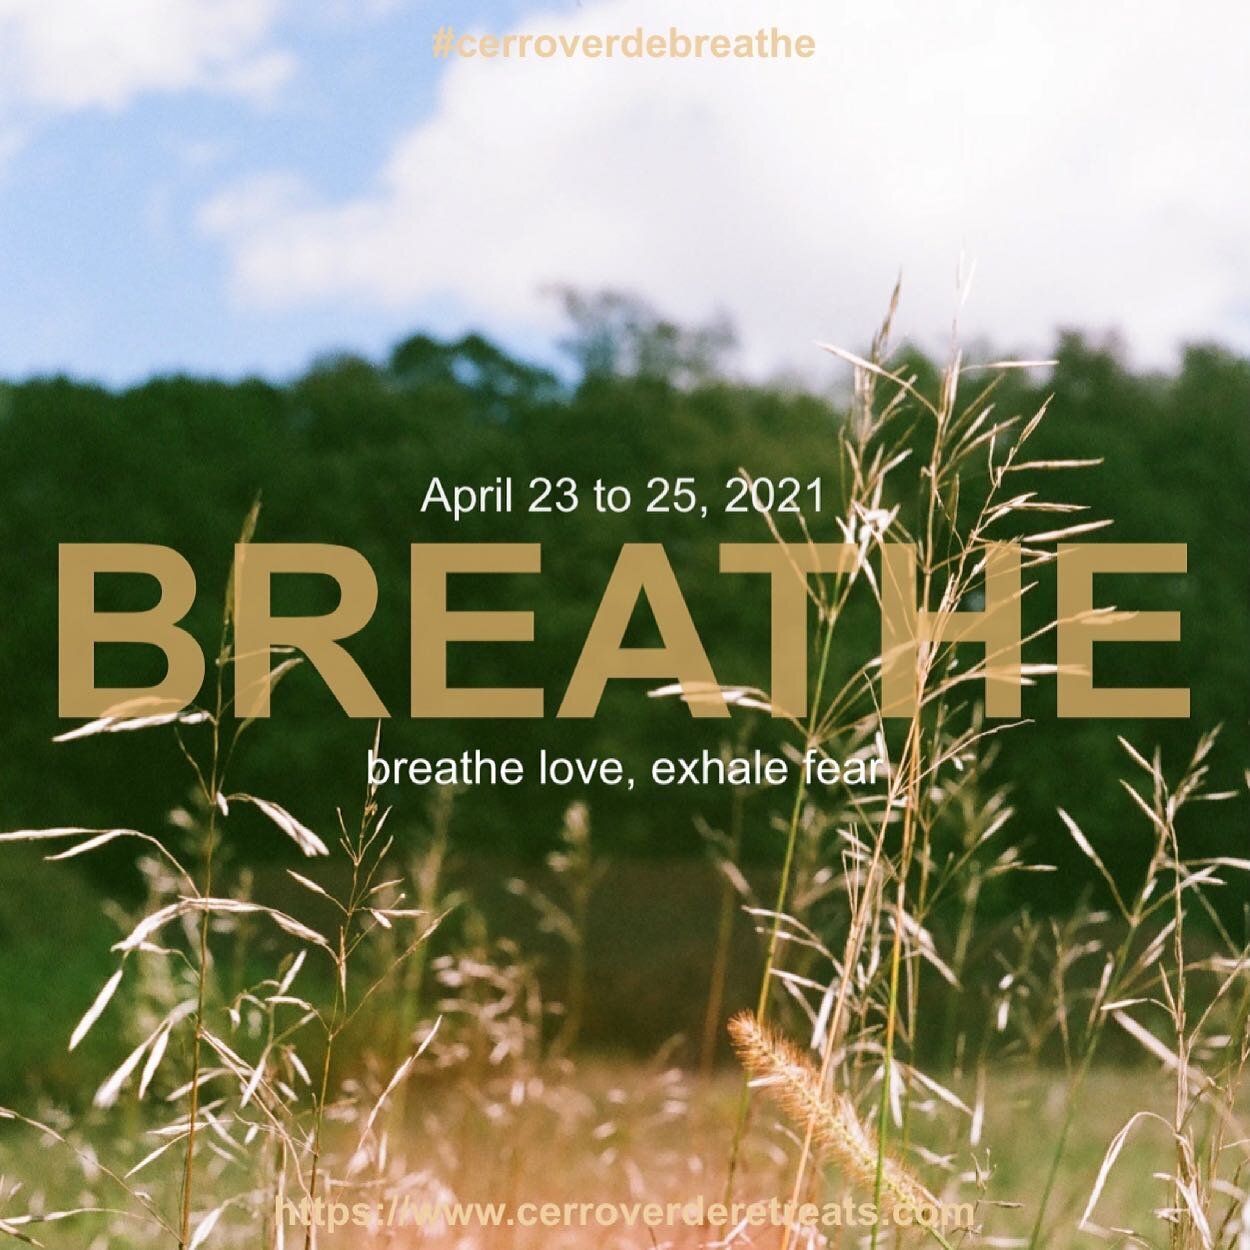 Join us at the &quot;BREATHE&quot; retreat from April 23rd through the 25th from breath works, hiking, meditation, and movement we will focus on loving-kindness through self-love and self-care.  Step into your highest self&hellip; Breathe!  #cerrover